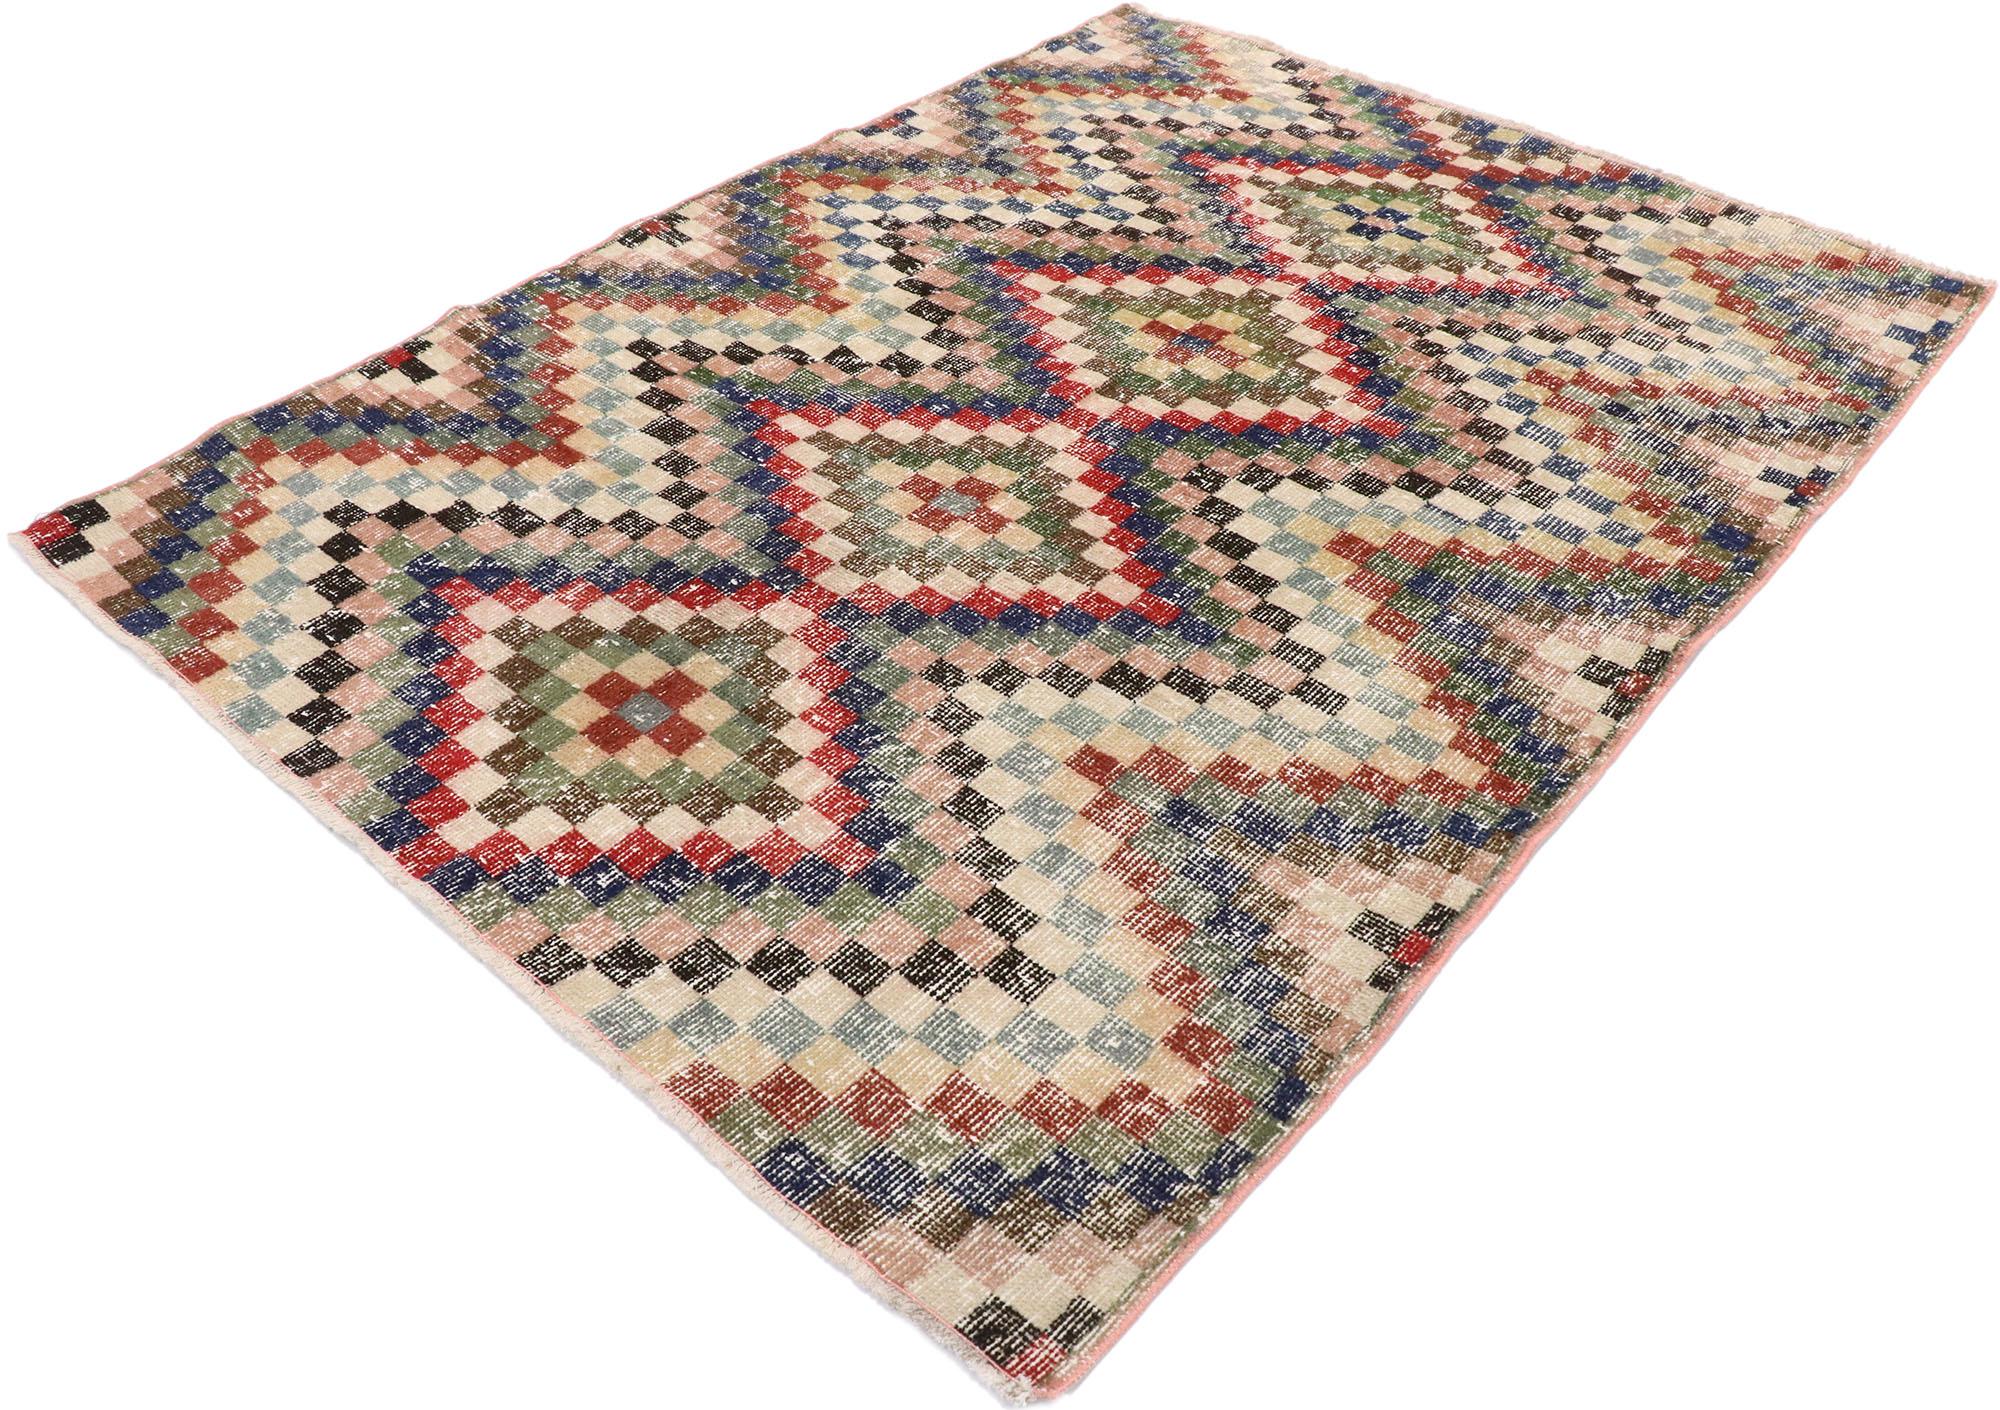 53357, distressed vintage Turkish Sivas rug with Mid-Century Modern rustic style. This hand knotted wool distressed vintage Turkish Sivas runner features an all-over checkered stacked diamond pattern comprised of rows of multicolored cubes. Each row